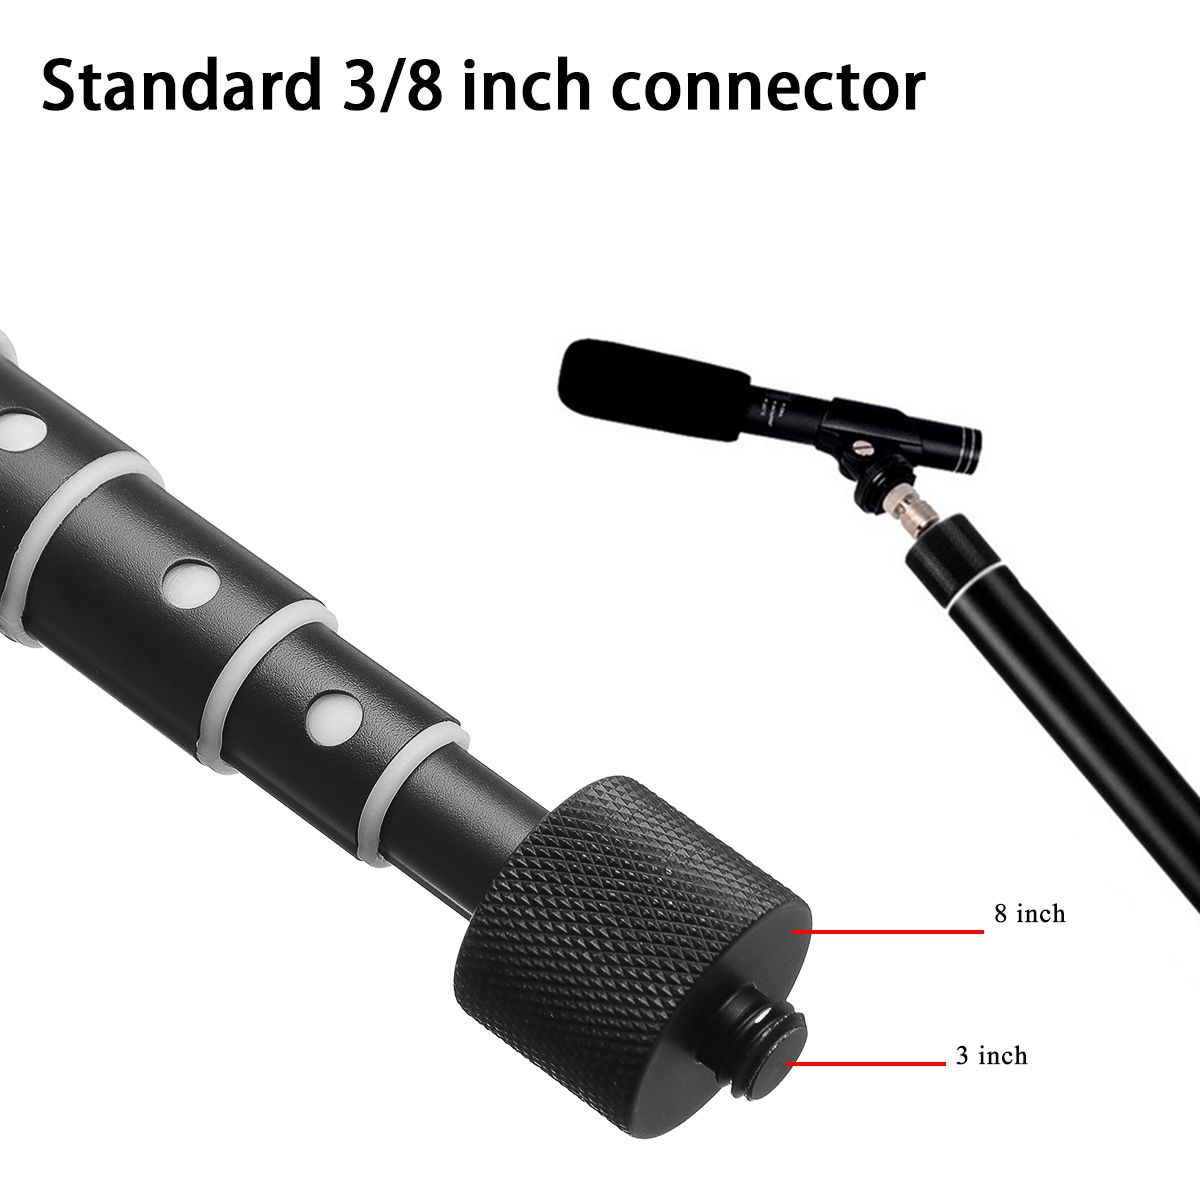 355cm-150cm-5-Section-Scalable-Microphone-Extension-Pole-Holder-38-Inches-Connector-1400712